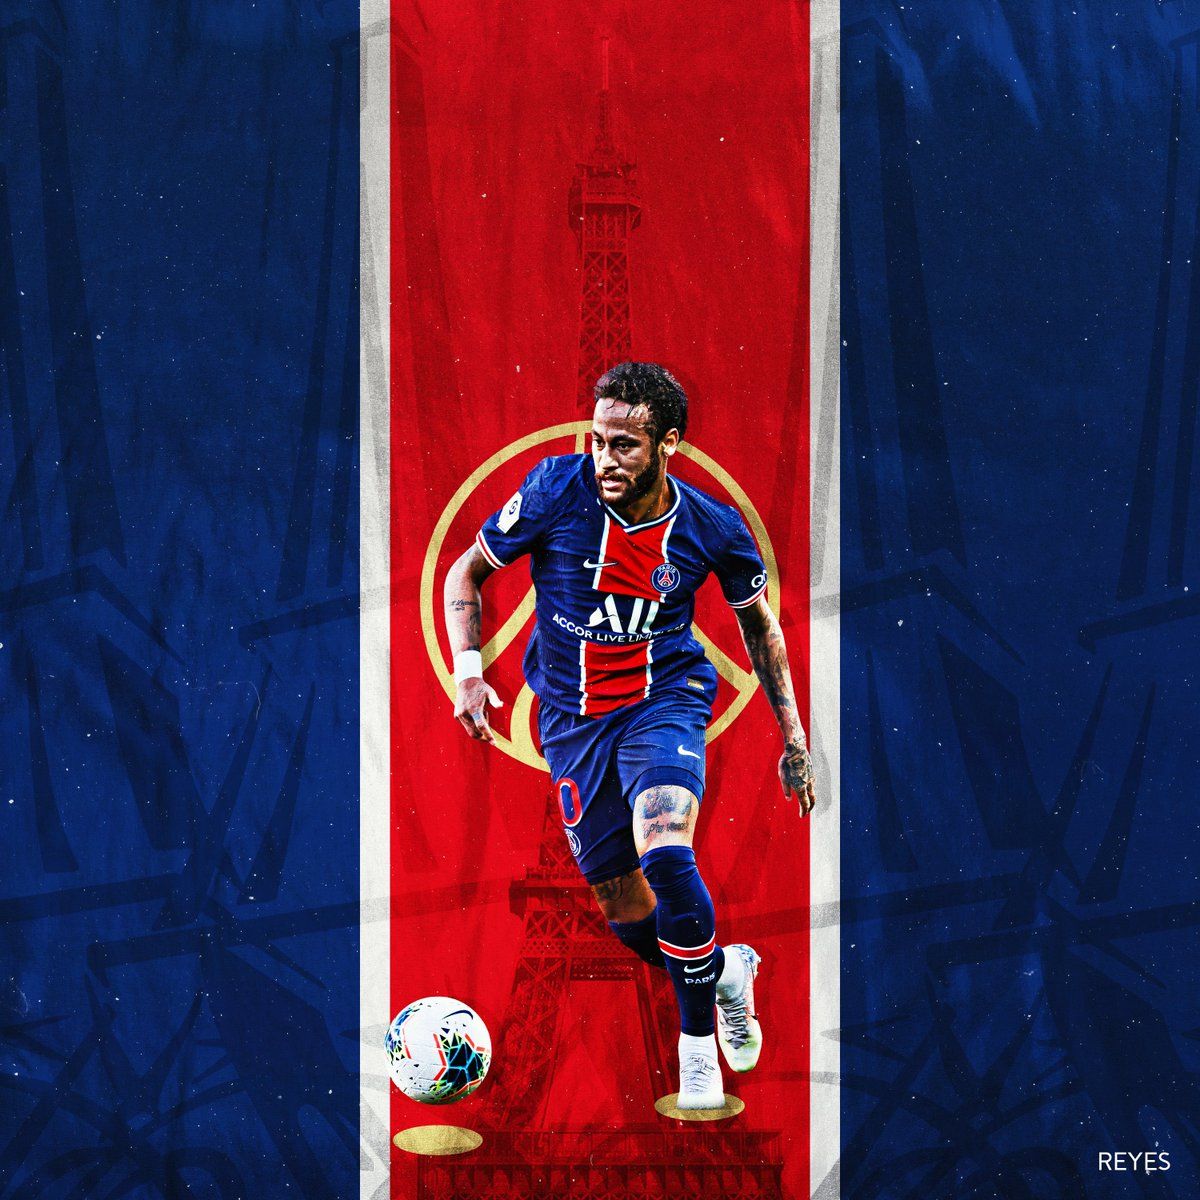 Psg 2021 Wallpapers posted by John Cunningham